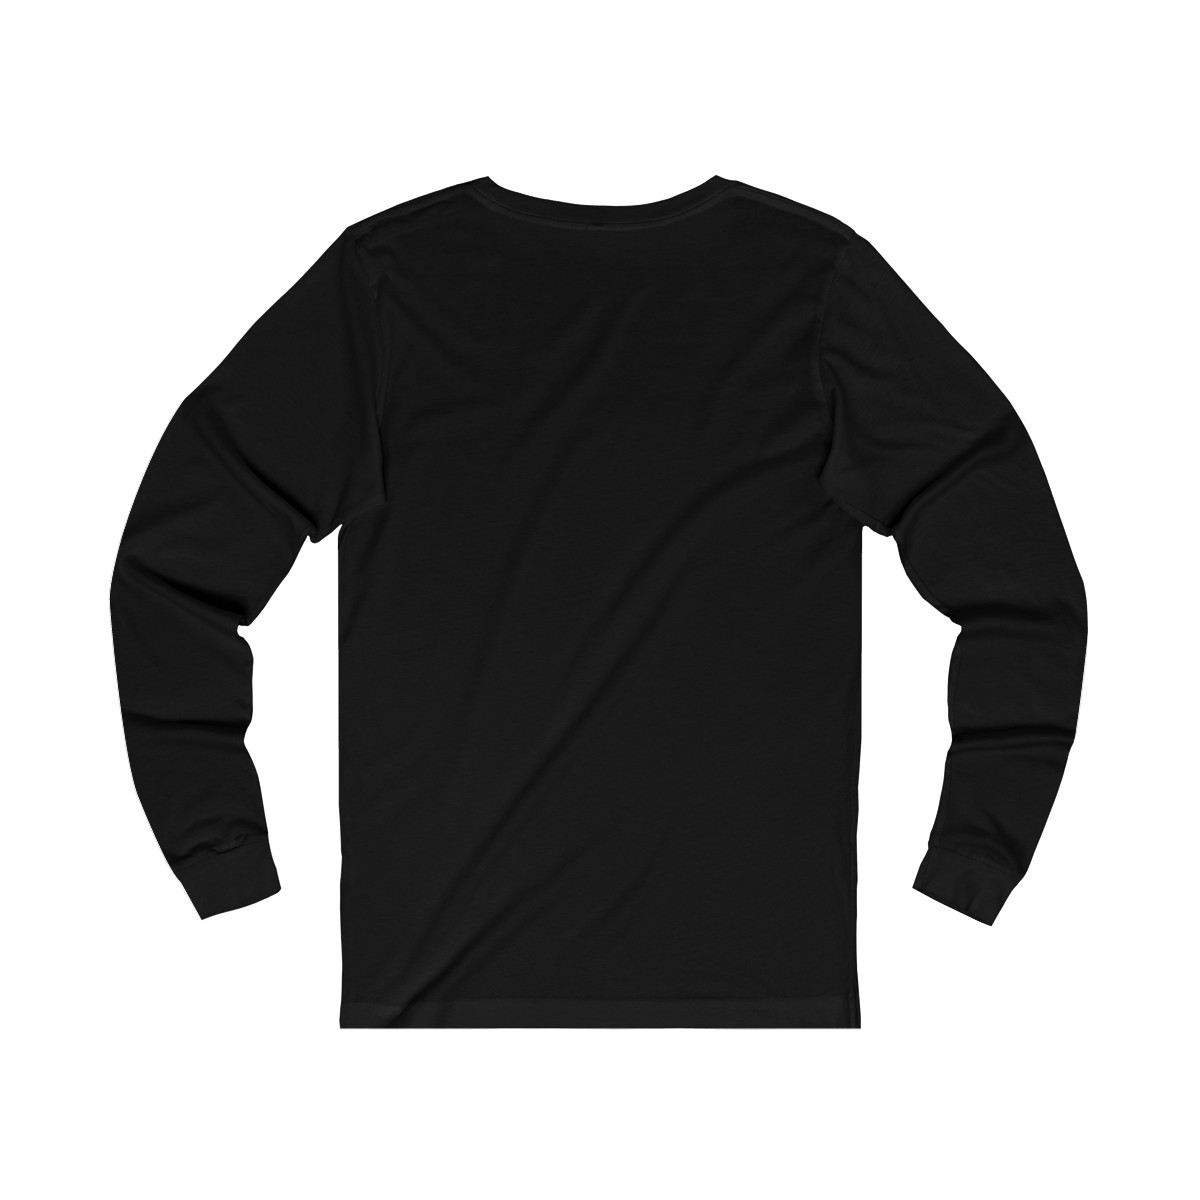 More Than a Hobby SCA Long Sleeve Tee product thumbnail image